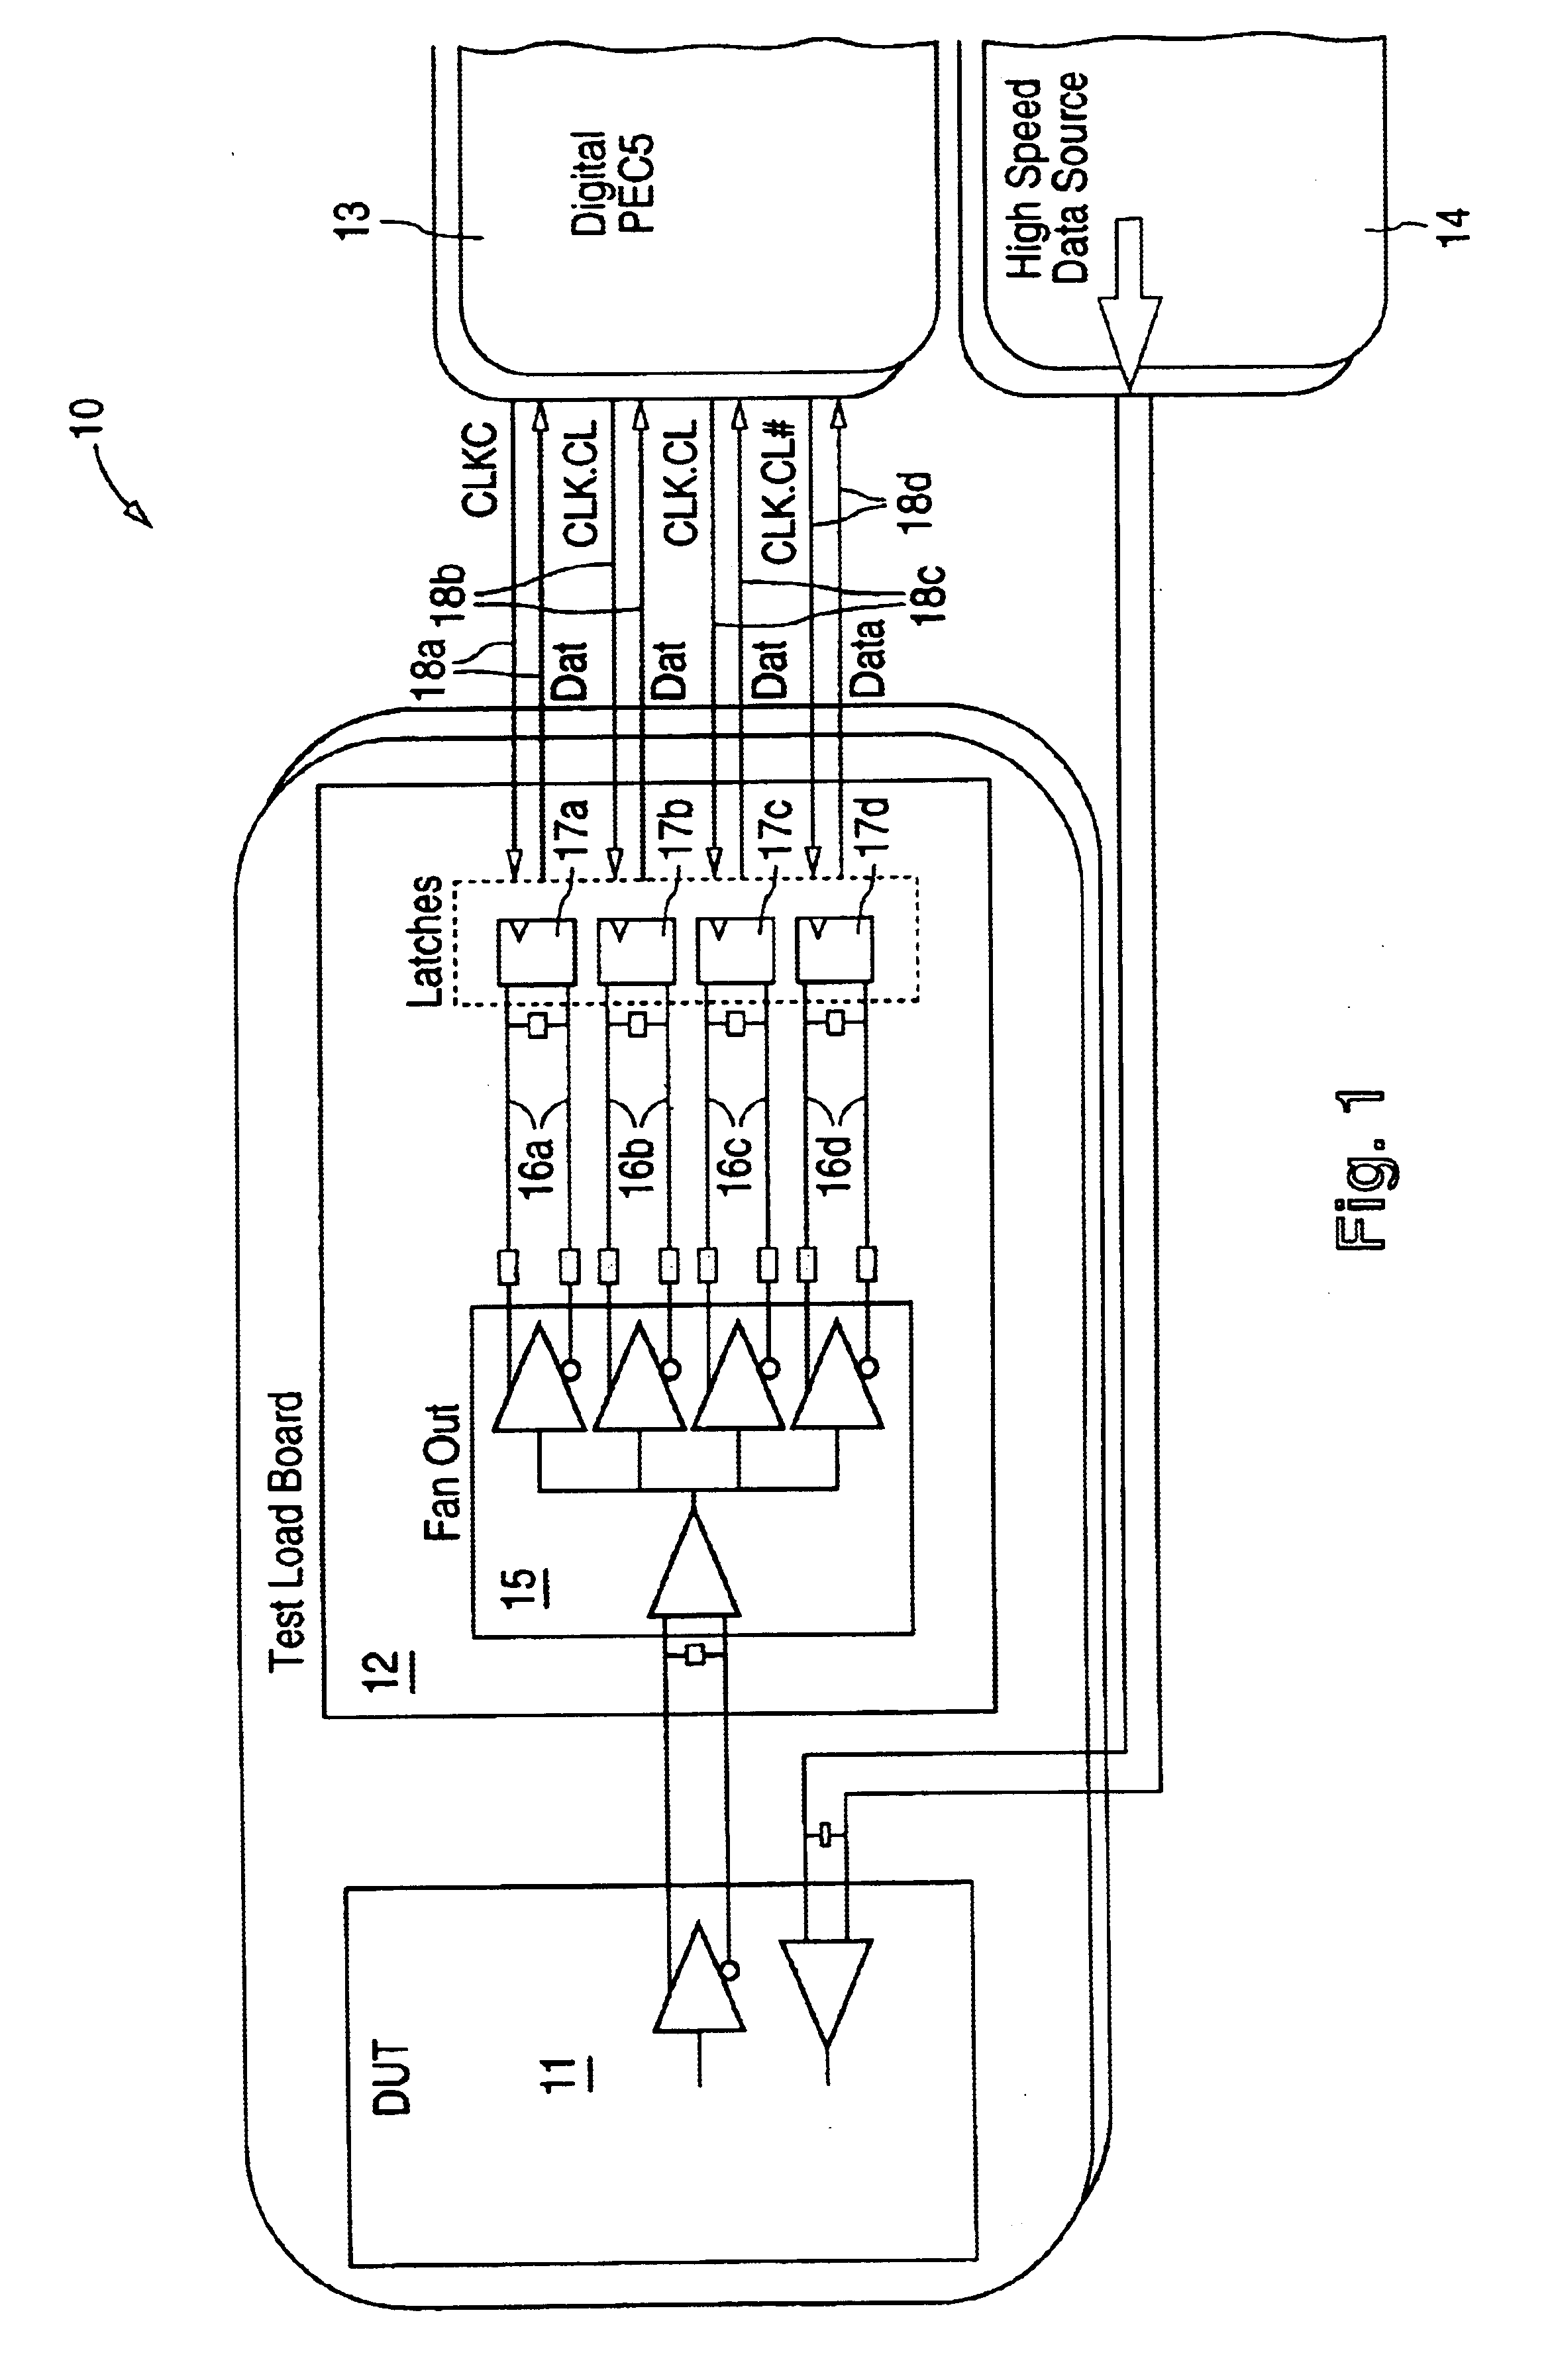 Method and apparatus for high speed IC test interface